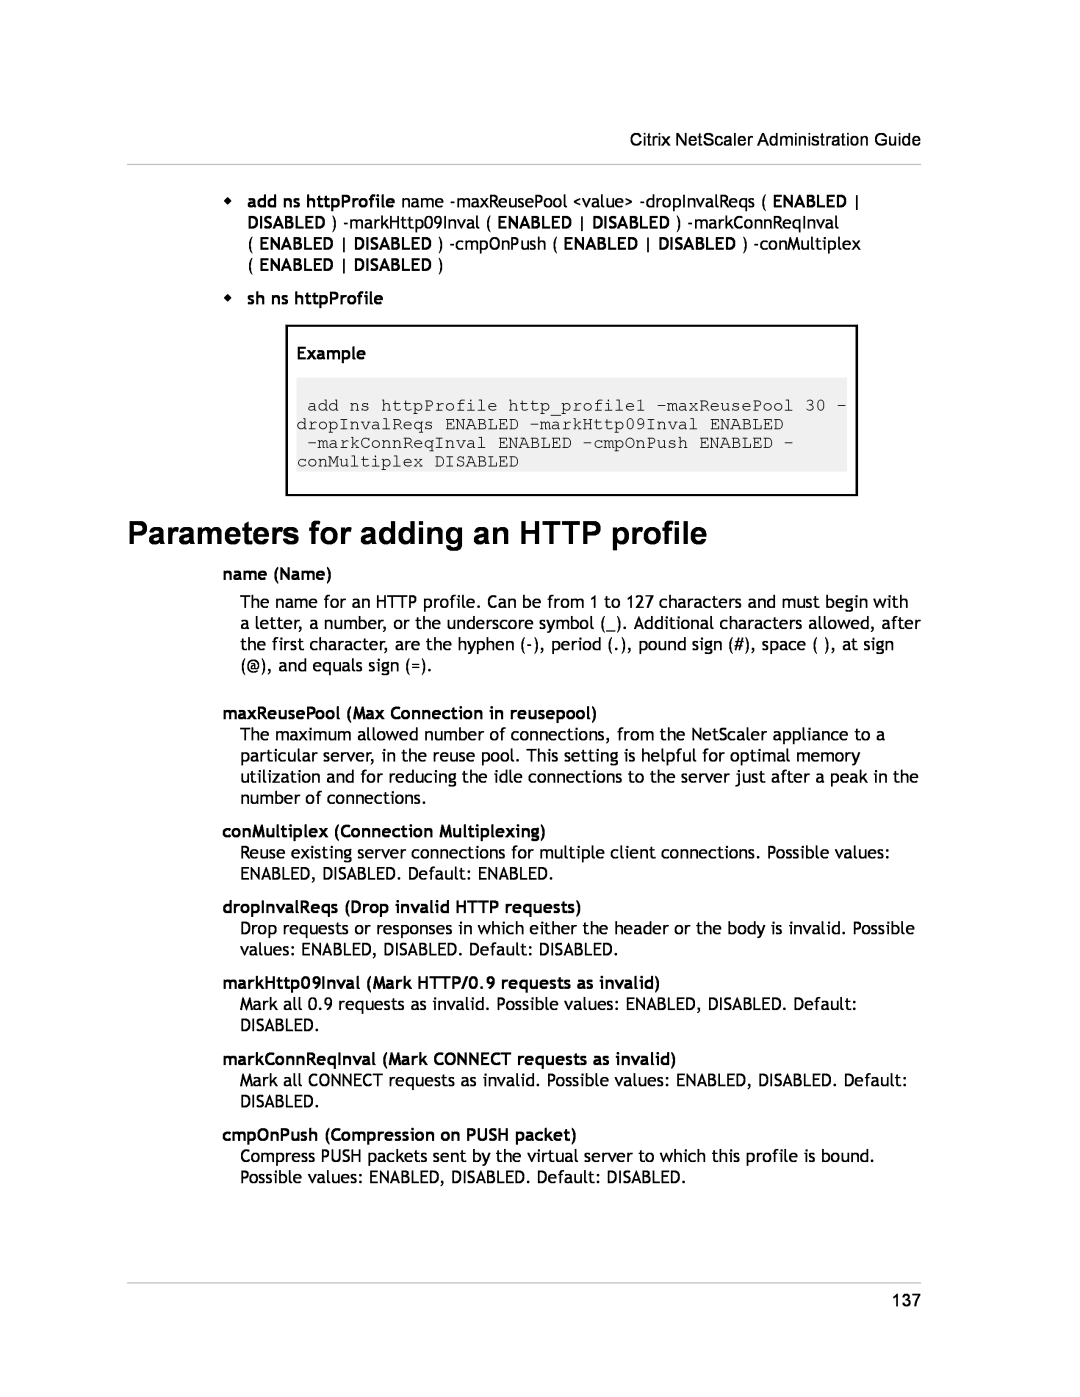 Citrix Systems CITRIX NETSCALER 9.3 Parameters for adding an HTTP profile, ENABLED DISABLED w sh ns httpProfile Example 